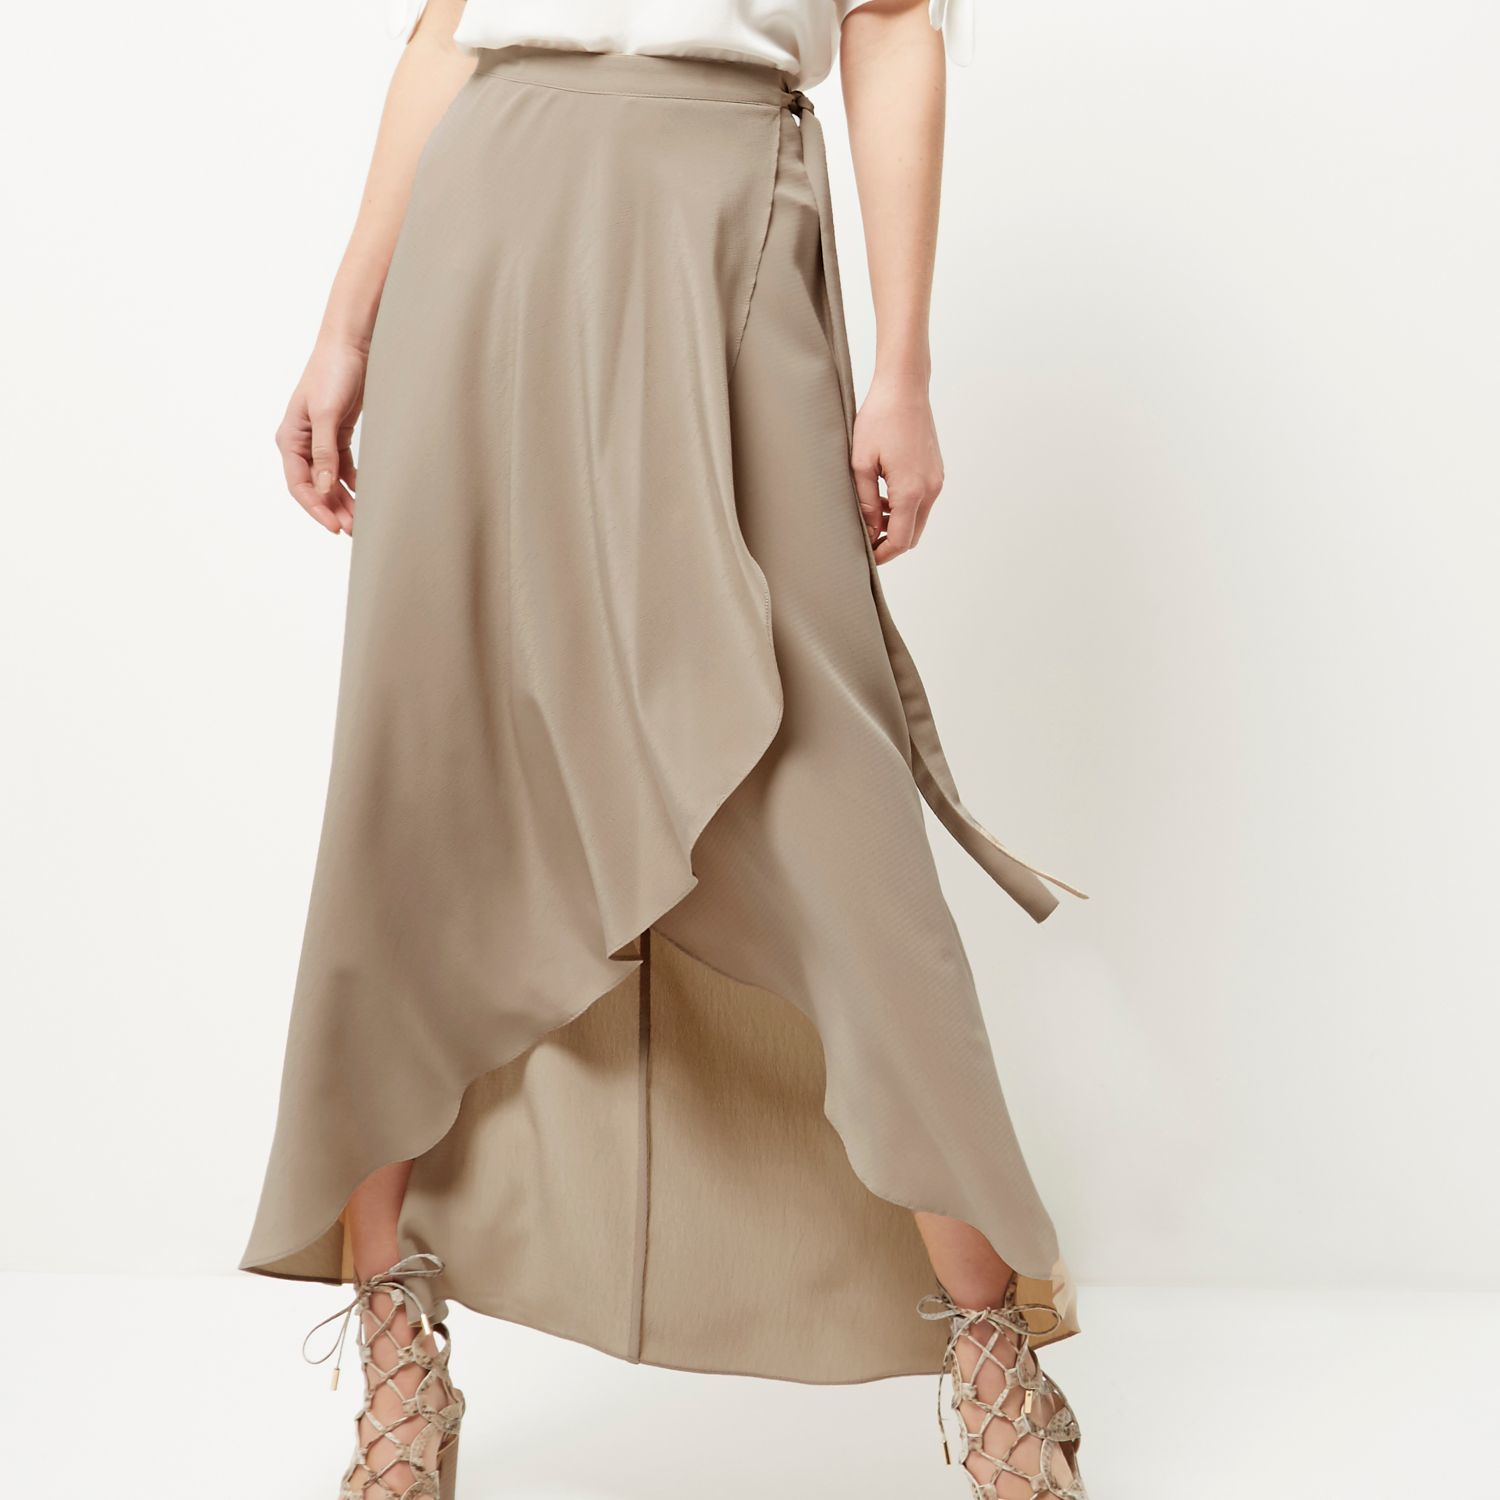 River Island Beige Wrap Front Midi Skirt in Natural - Lyst